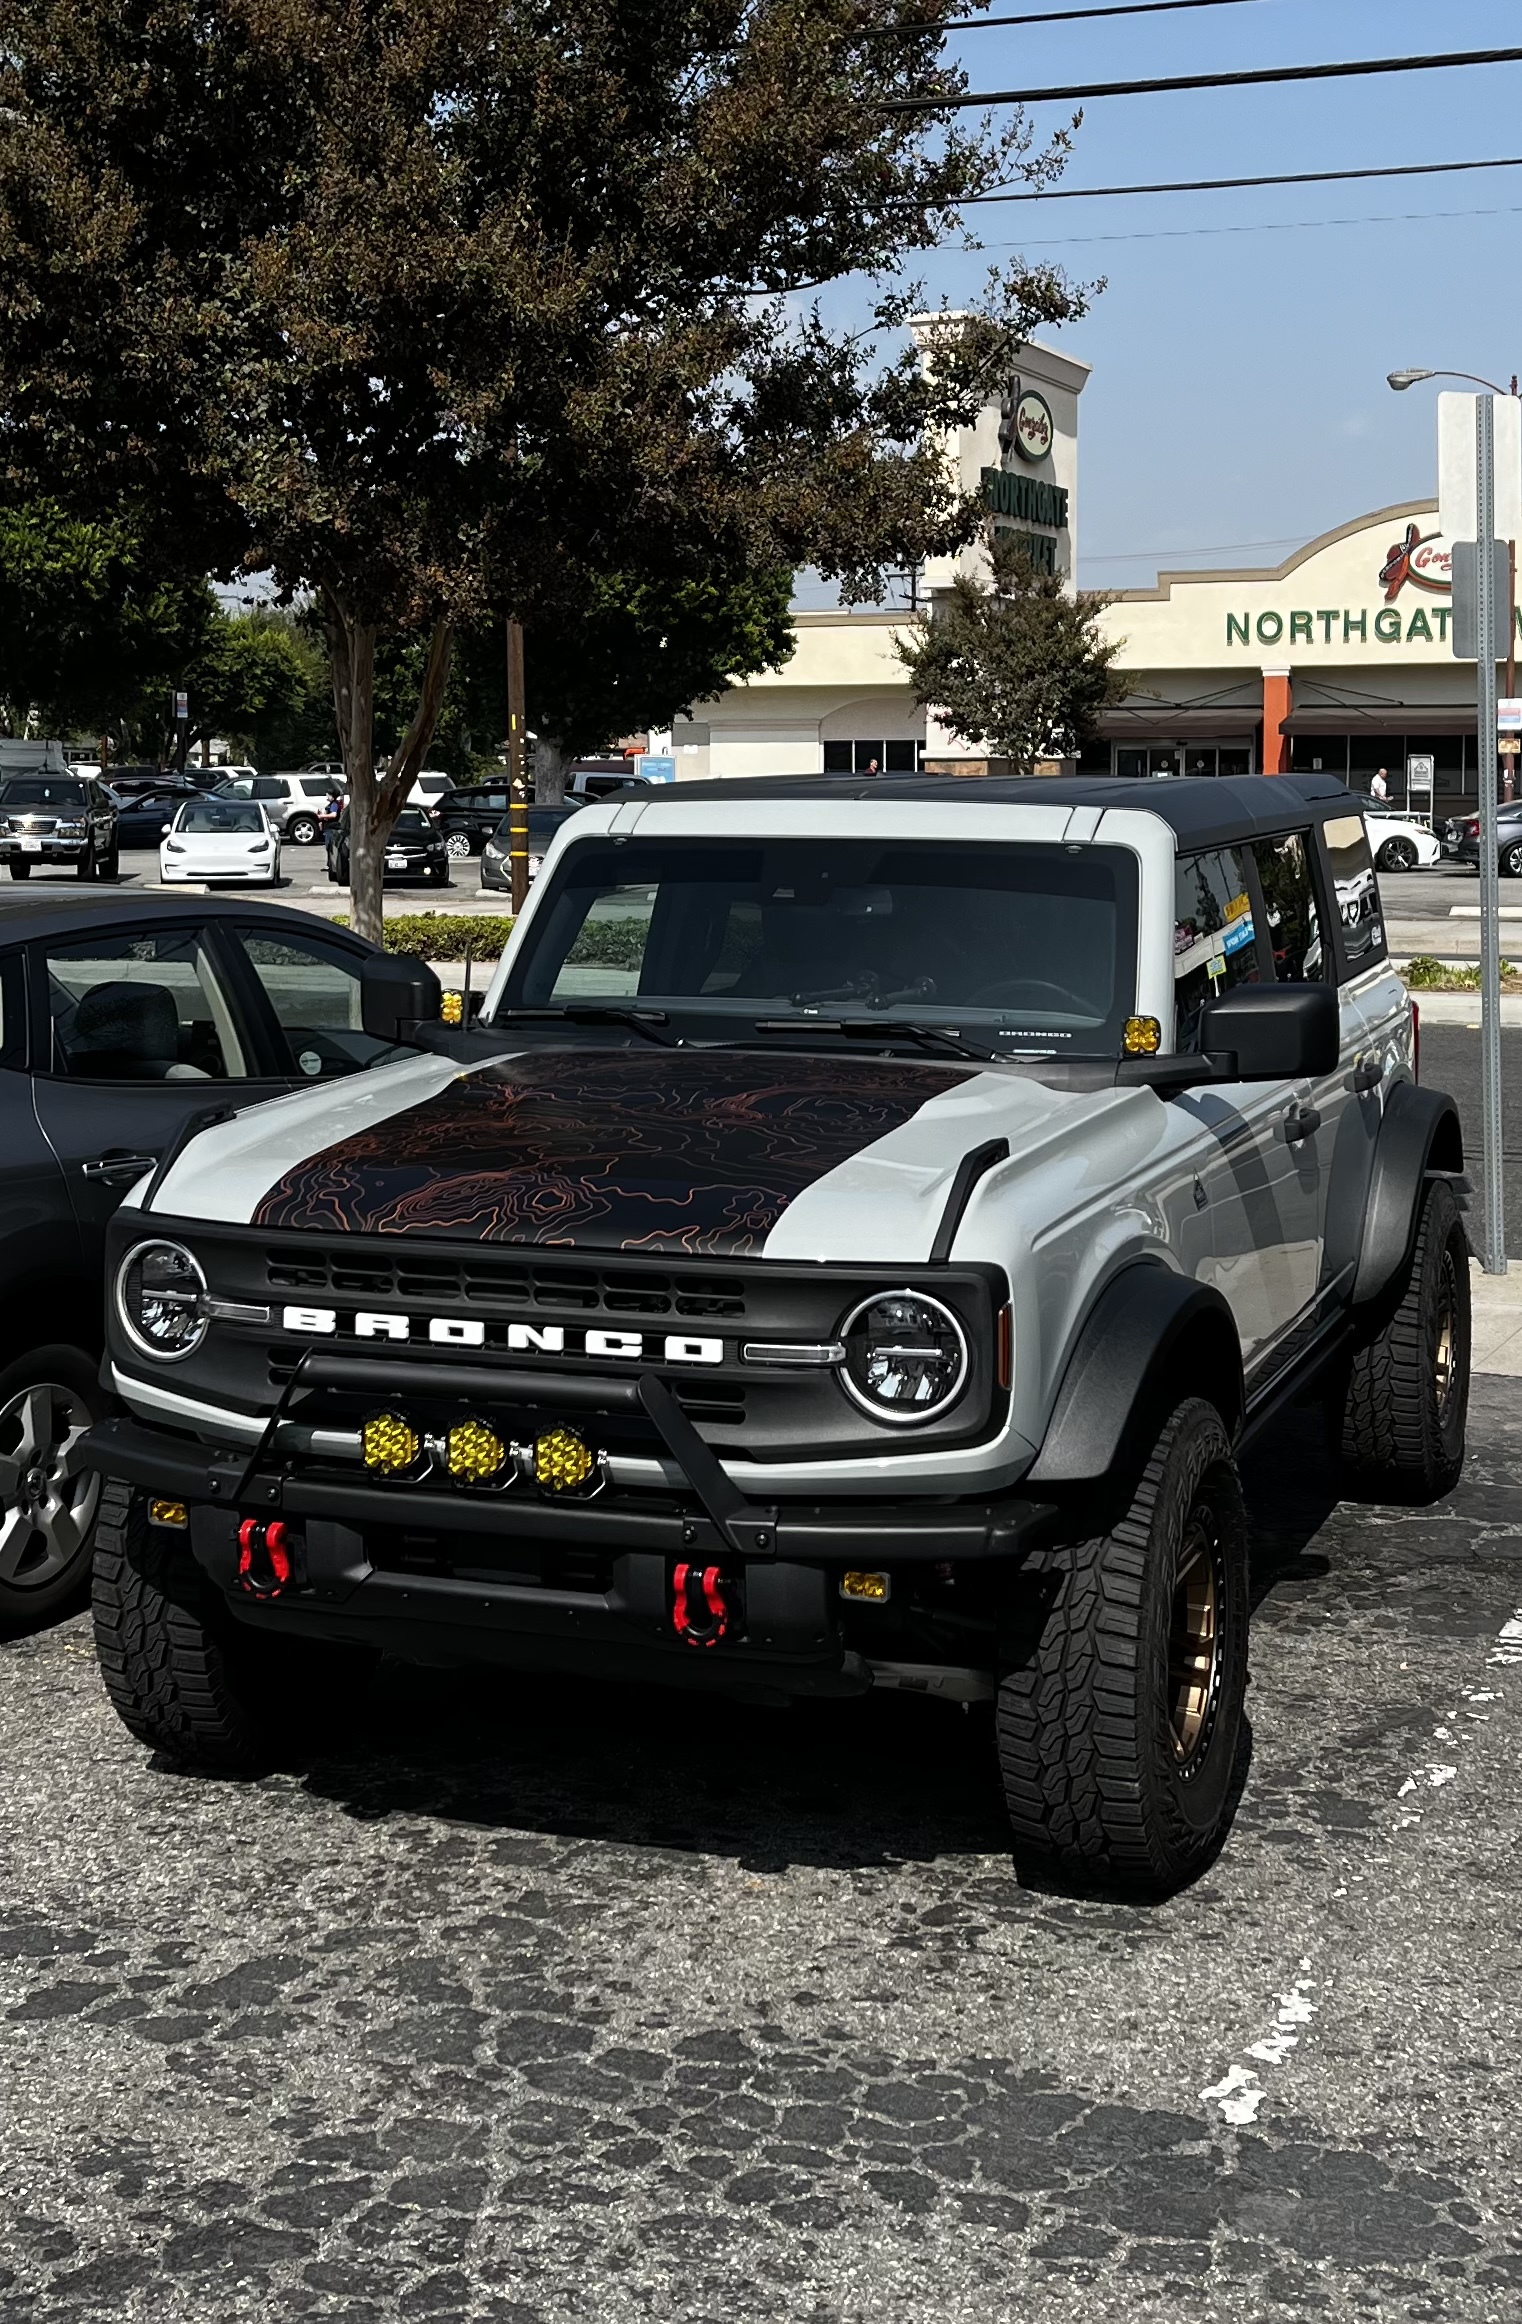 Ford Bronco Then & Now: show your assembly line Bronco and current Bronco picture 8757441F-4978-4738-96E6-F5D5D52B3E21